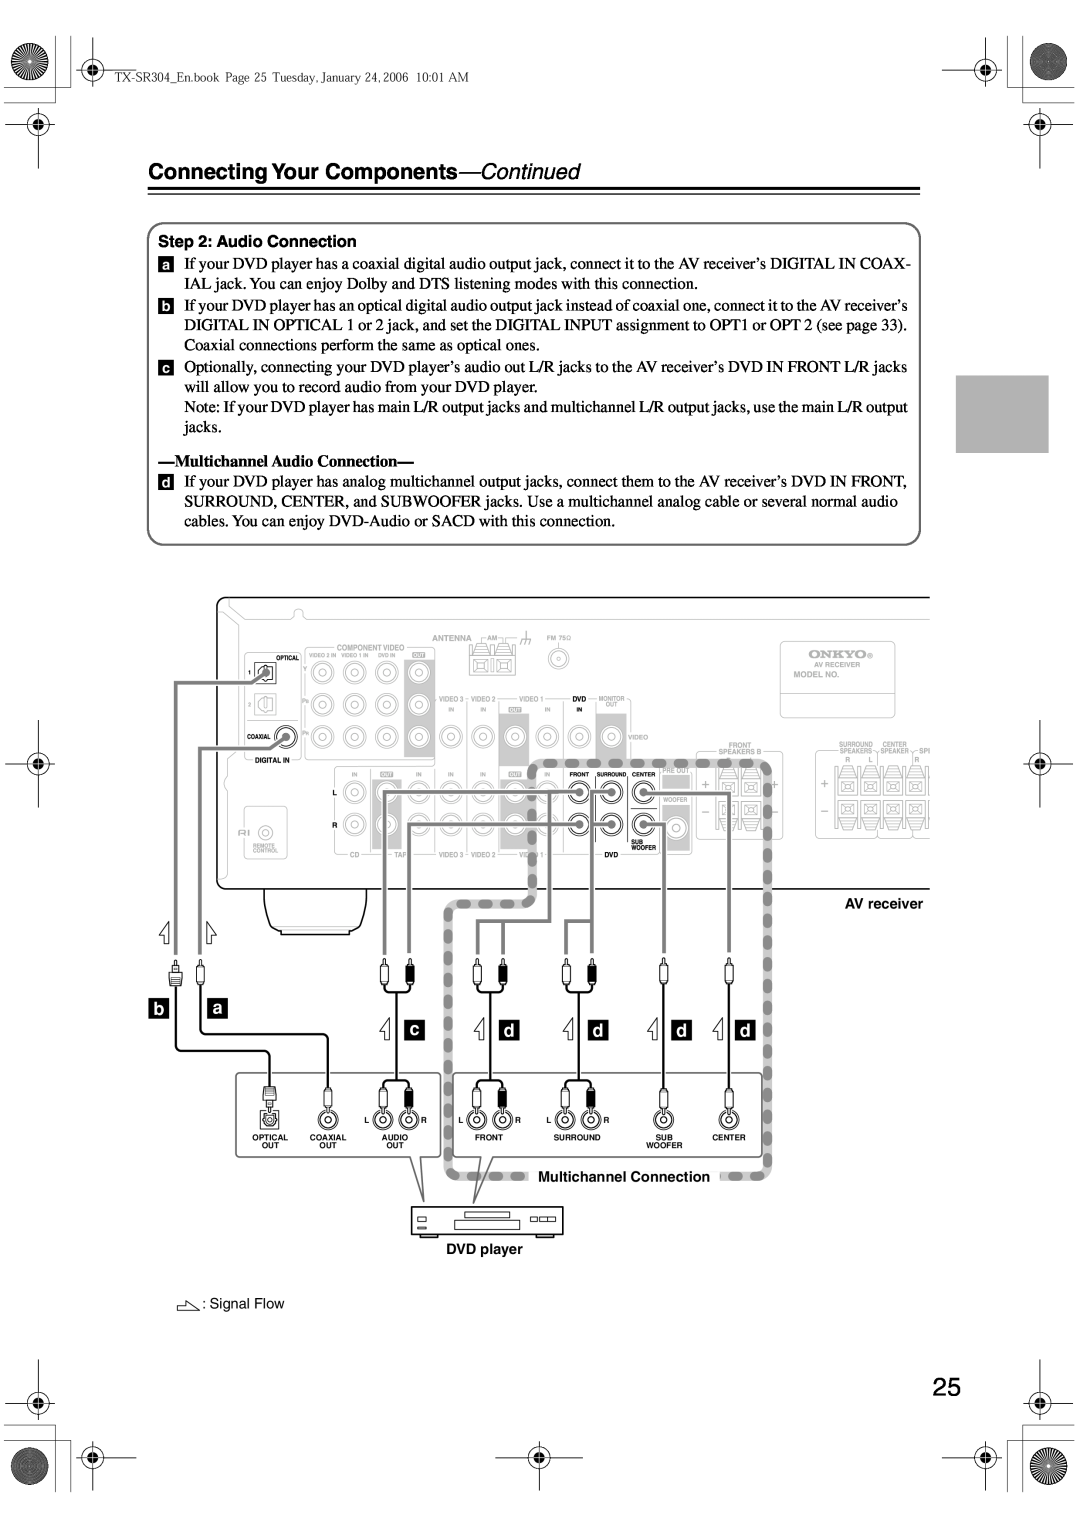 Onkyo TX-SR404, TX-SR8440, TX-SR304E instruction manual b a c, Connecting Your Components-Continued, Audio Connection 